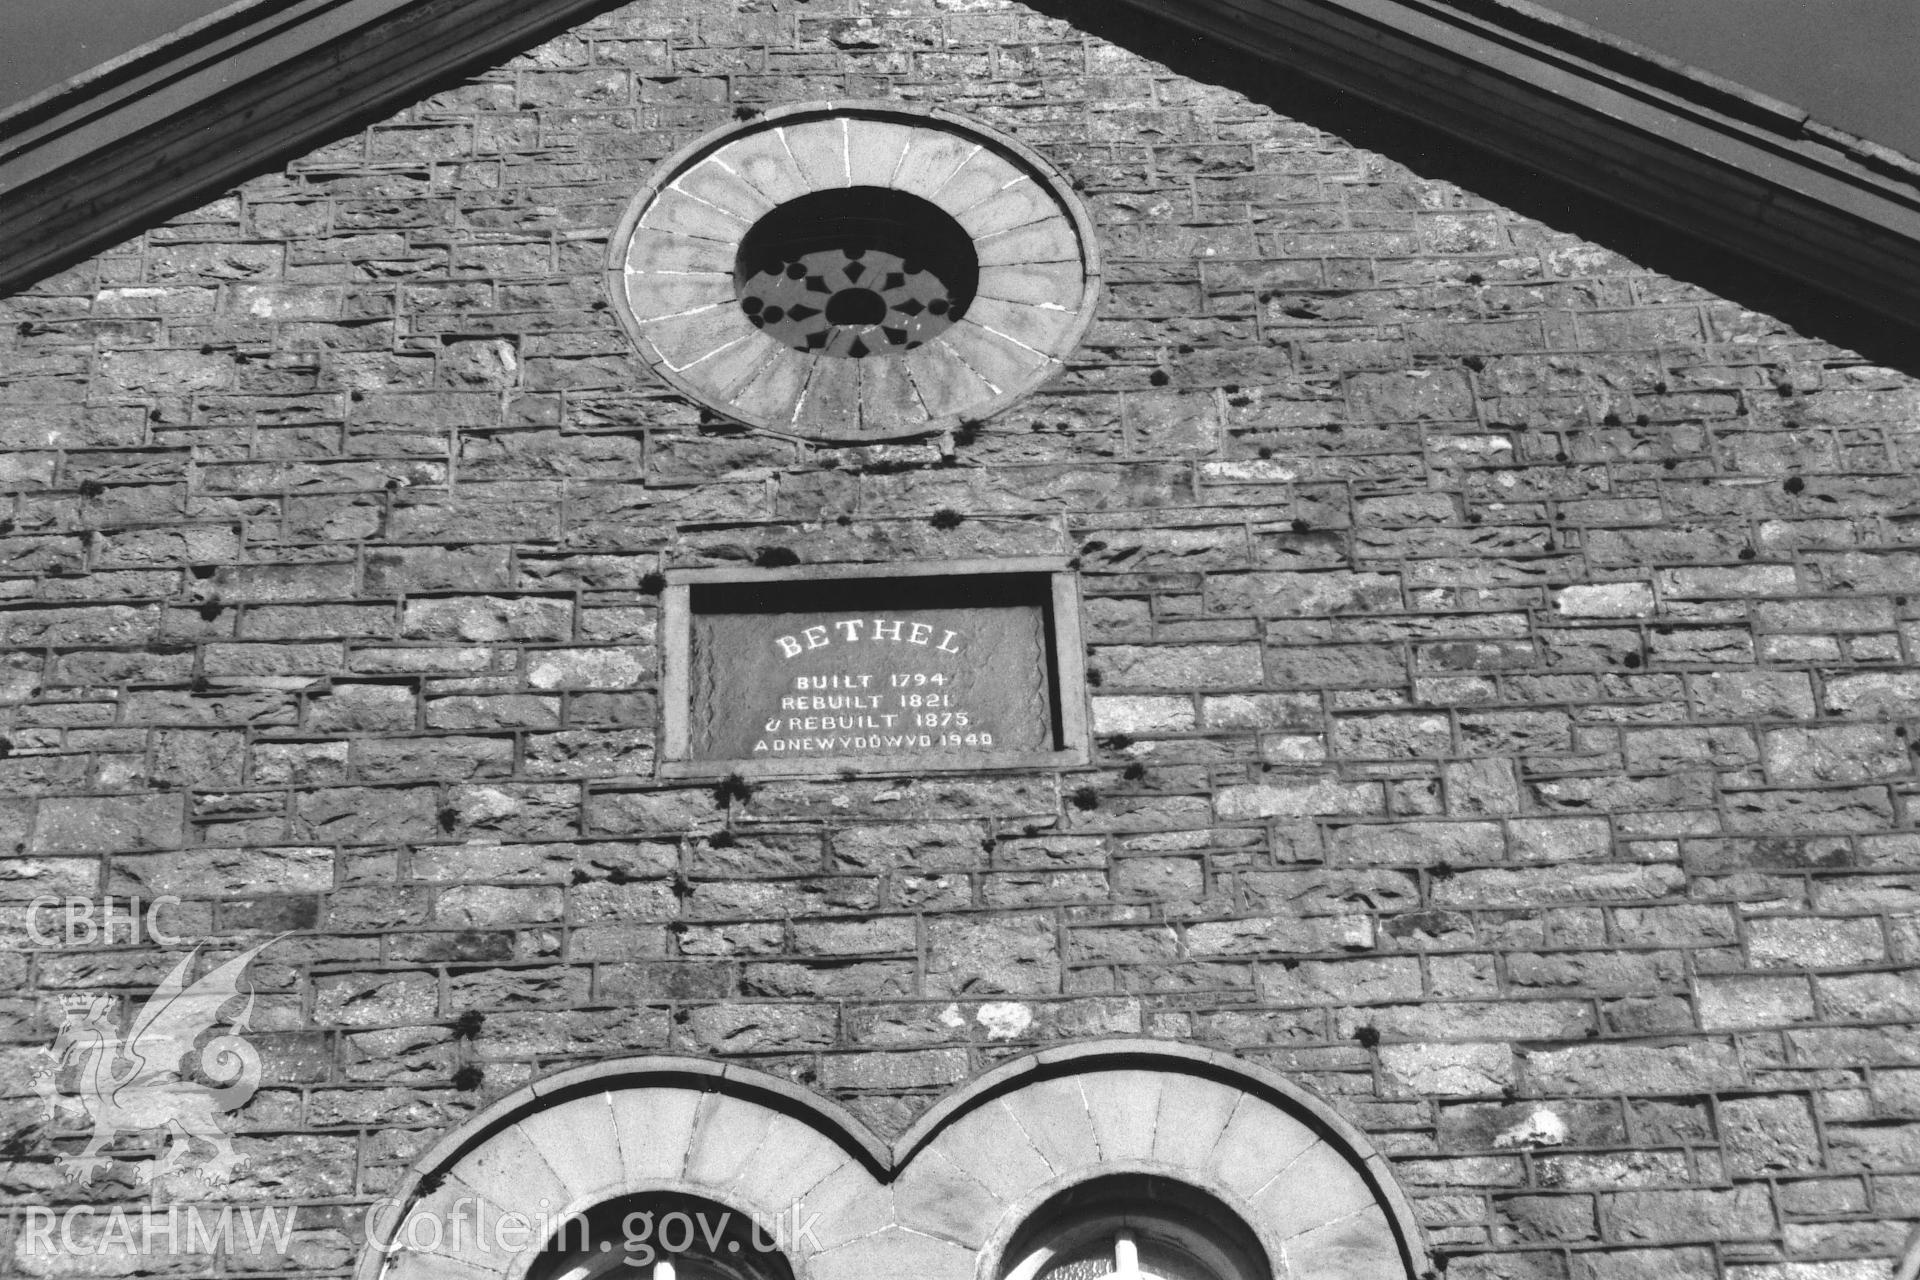 Digital copy of a black and white photograph showing detail of datestone at Bethel Baptist Chapel, Mynachlog Ddu, taken by Robert Scourfield, 1995.